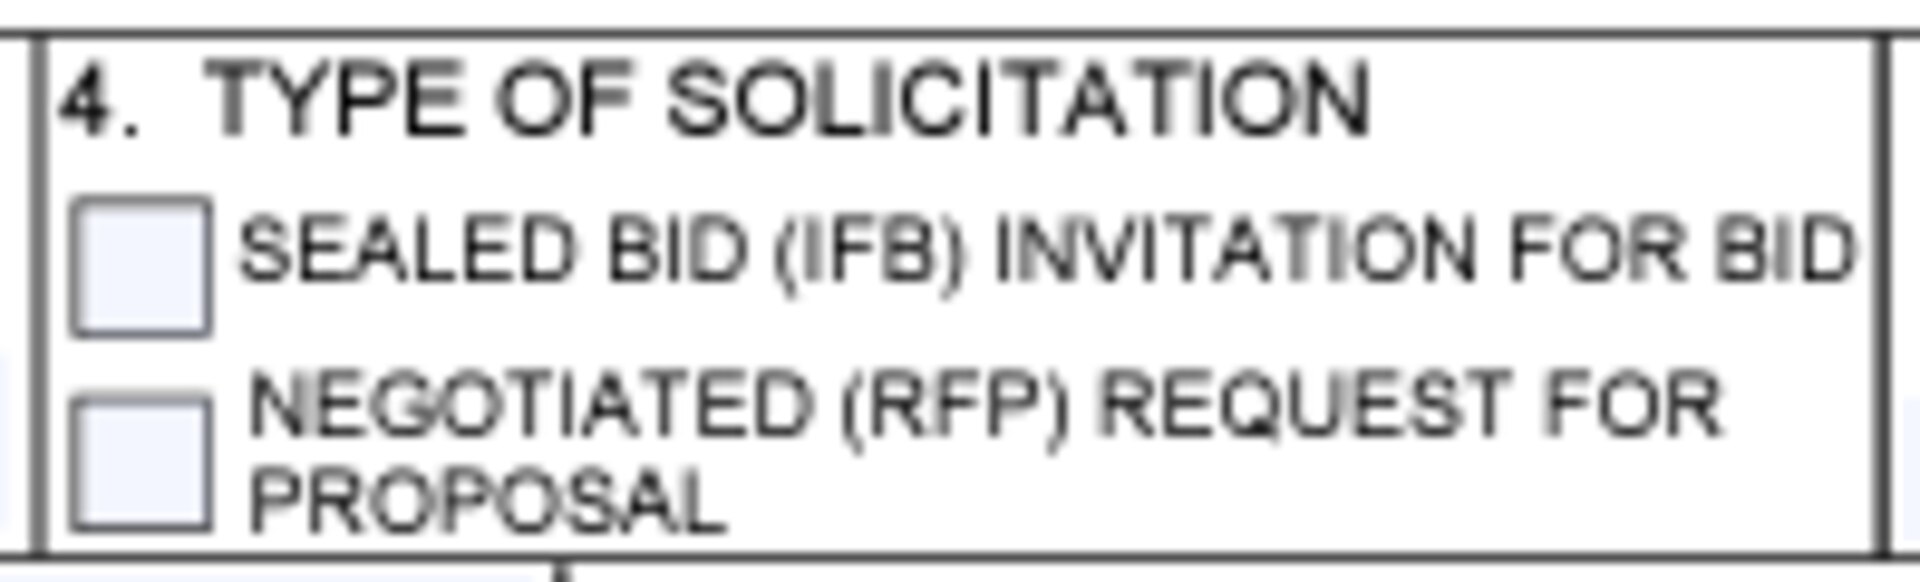 Box 4 of the Solicitation, Offer, and Award Form (SF33) for Type of Solicitation checked either Sealed Bid (IFB) Invitation for Bid or Negotiated (RFP) Request for Proposal.